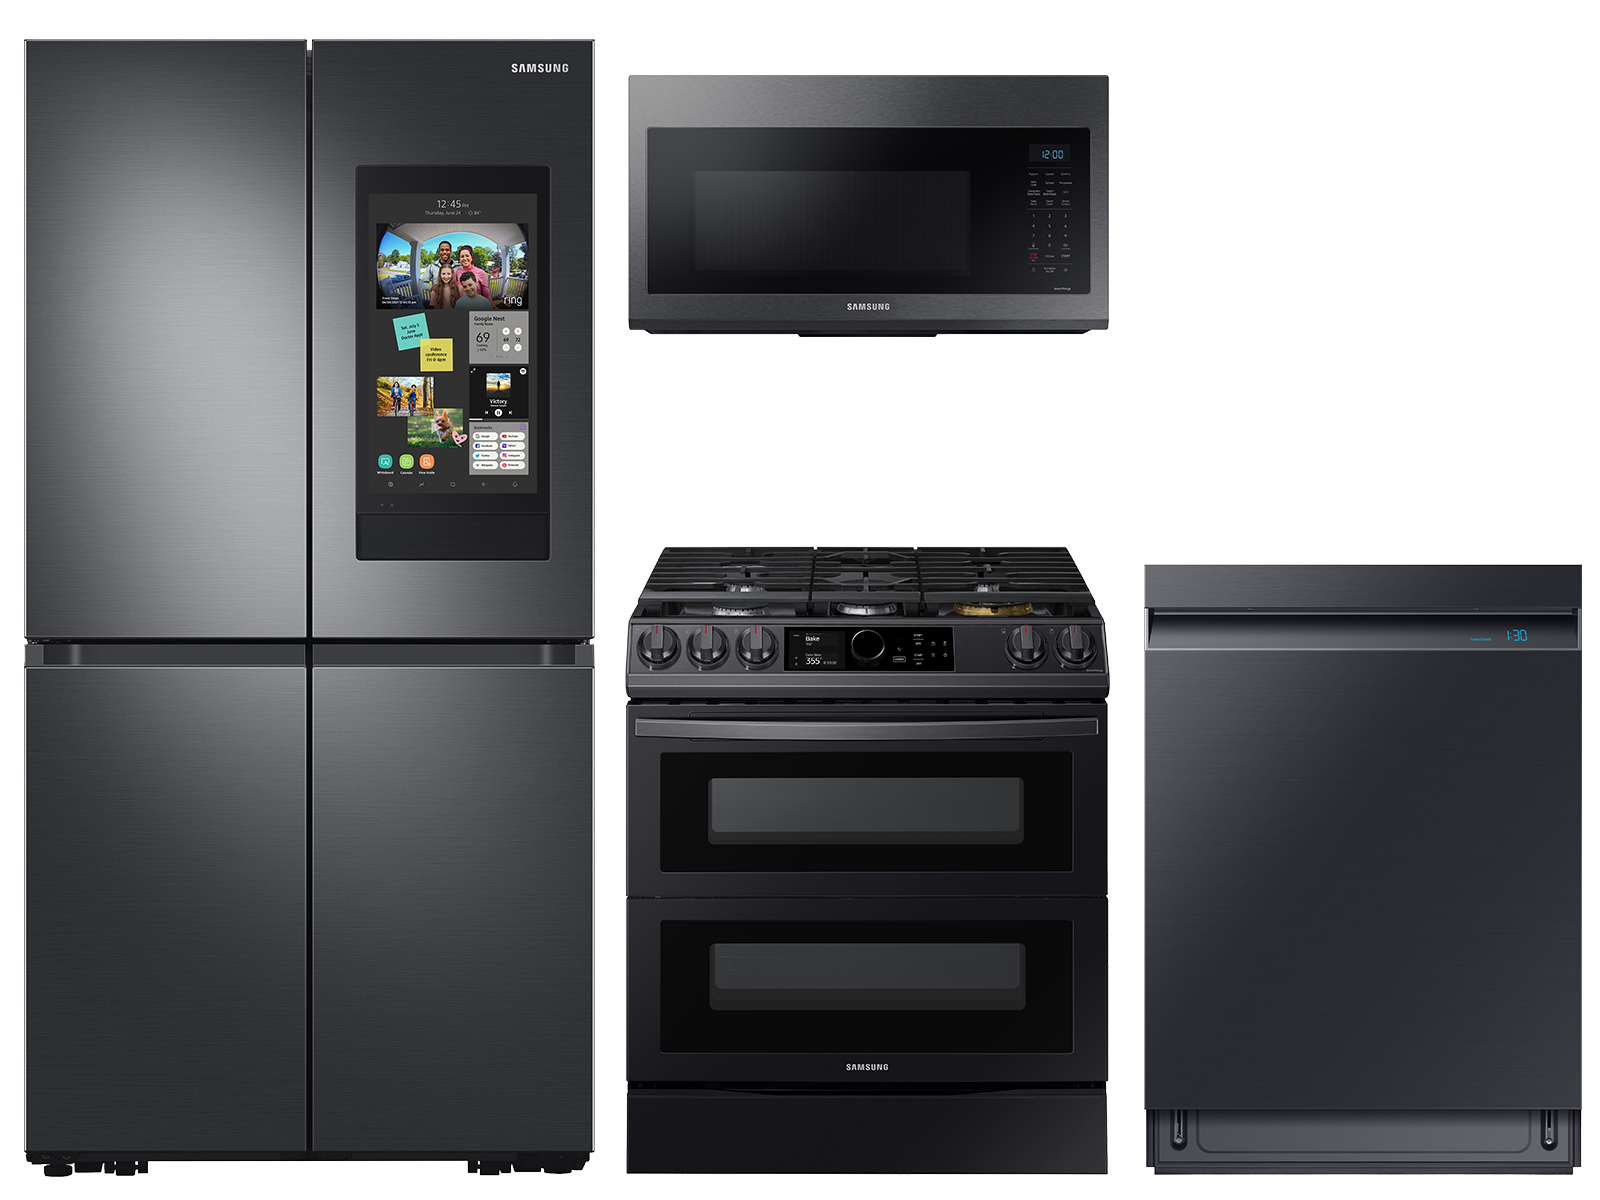 Samsung 29 cu. ft. Family Hub™ 4-Door refrigerator, gas range, convection microwave and Smart Linear dishwasher package in Black Stainless Steel